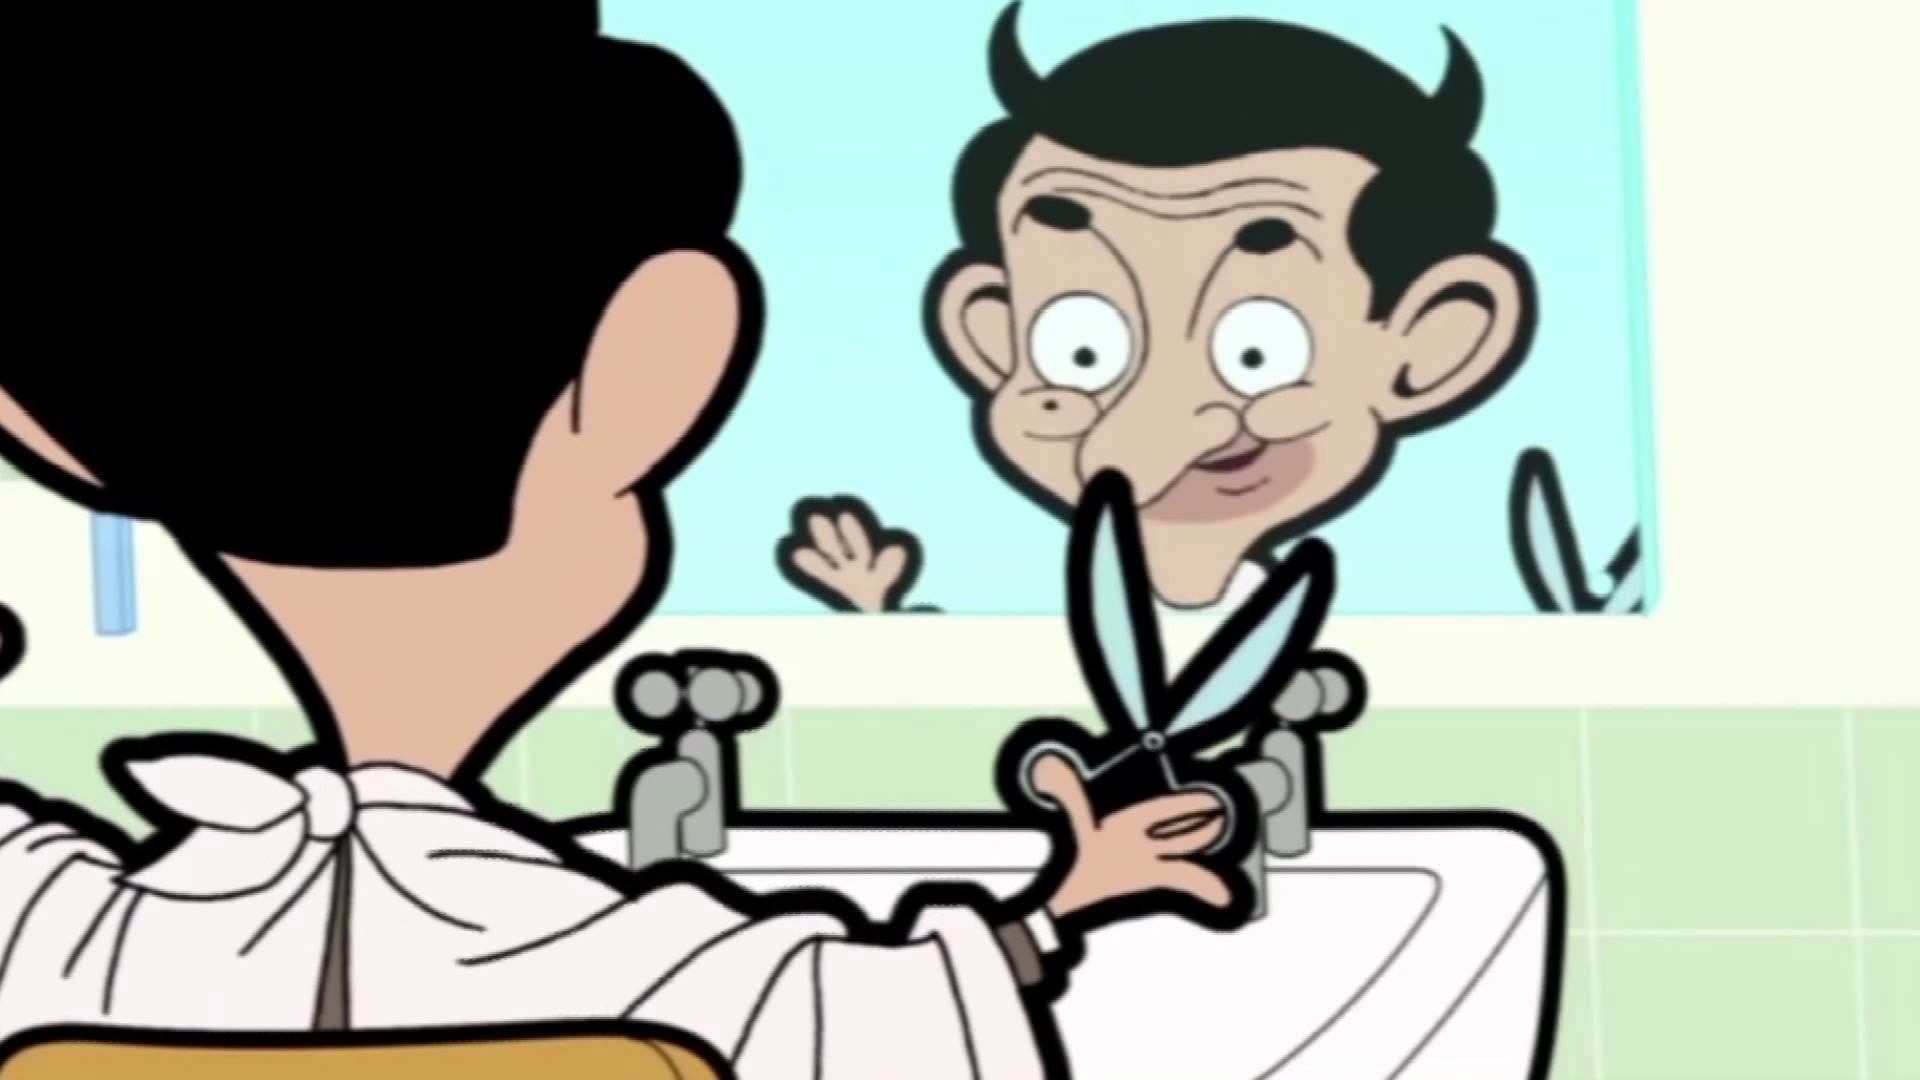 1920x1080 Mr Bean the Animated Series New Collection 2016 - Home Haircut !!!